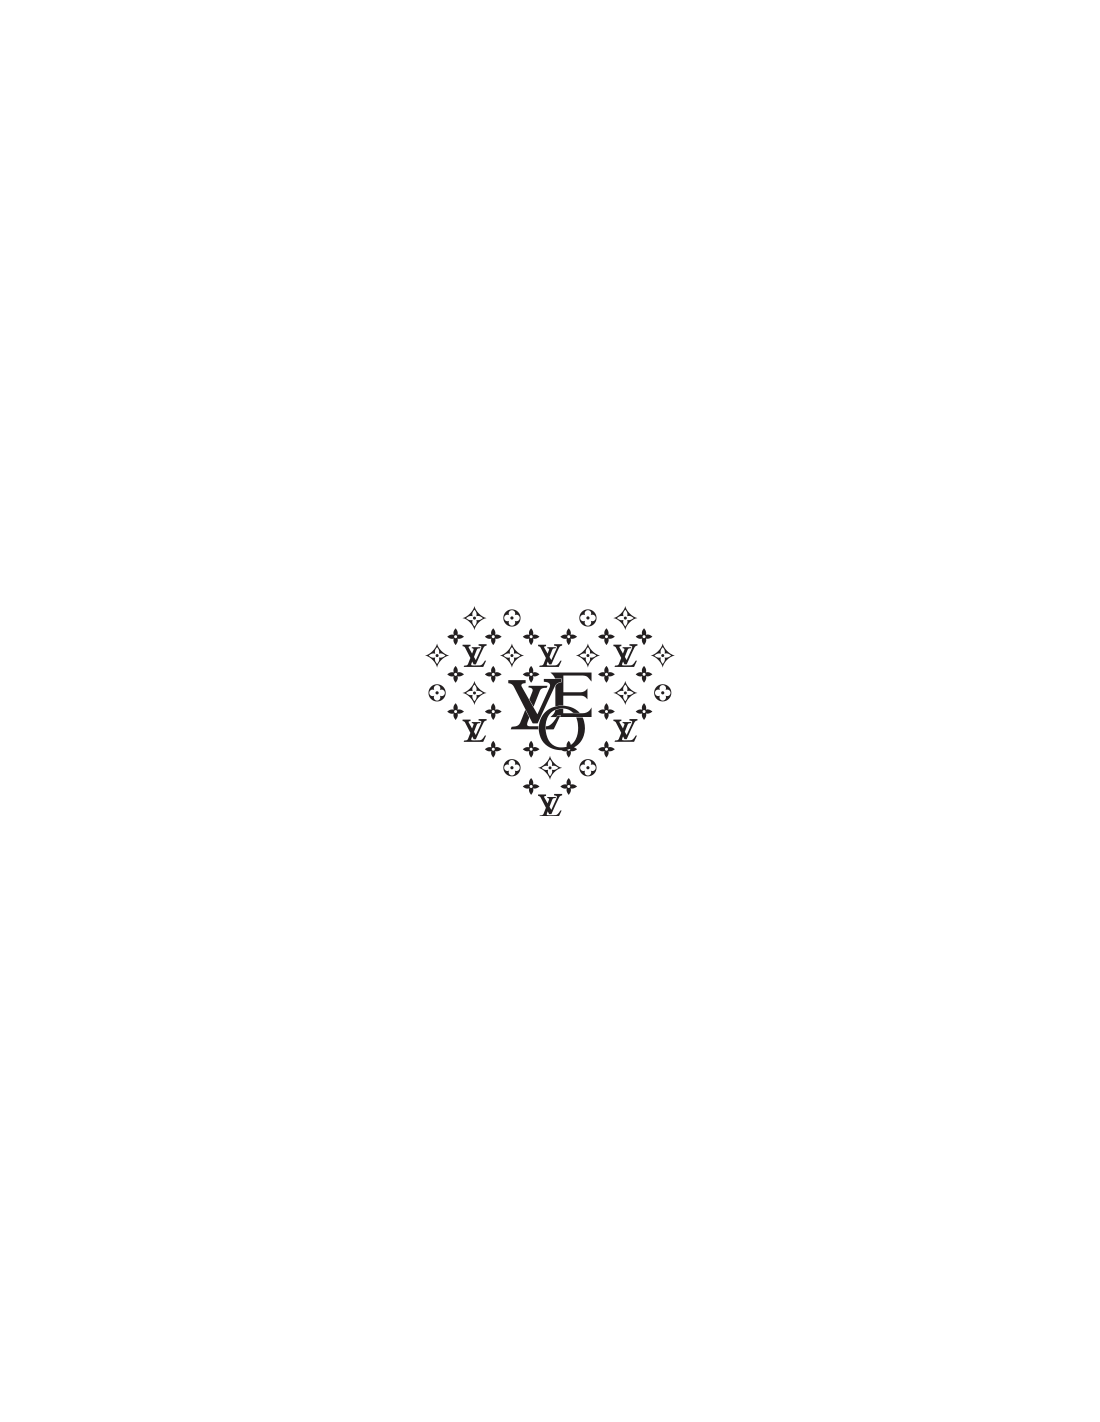 A green background with a heart symbol in the middle - Louis Vuitton